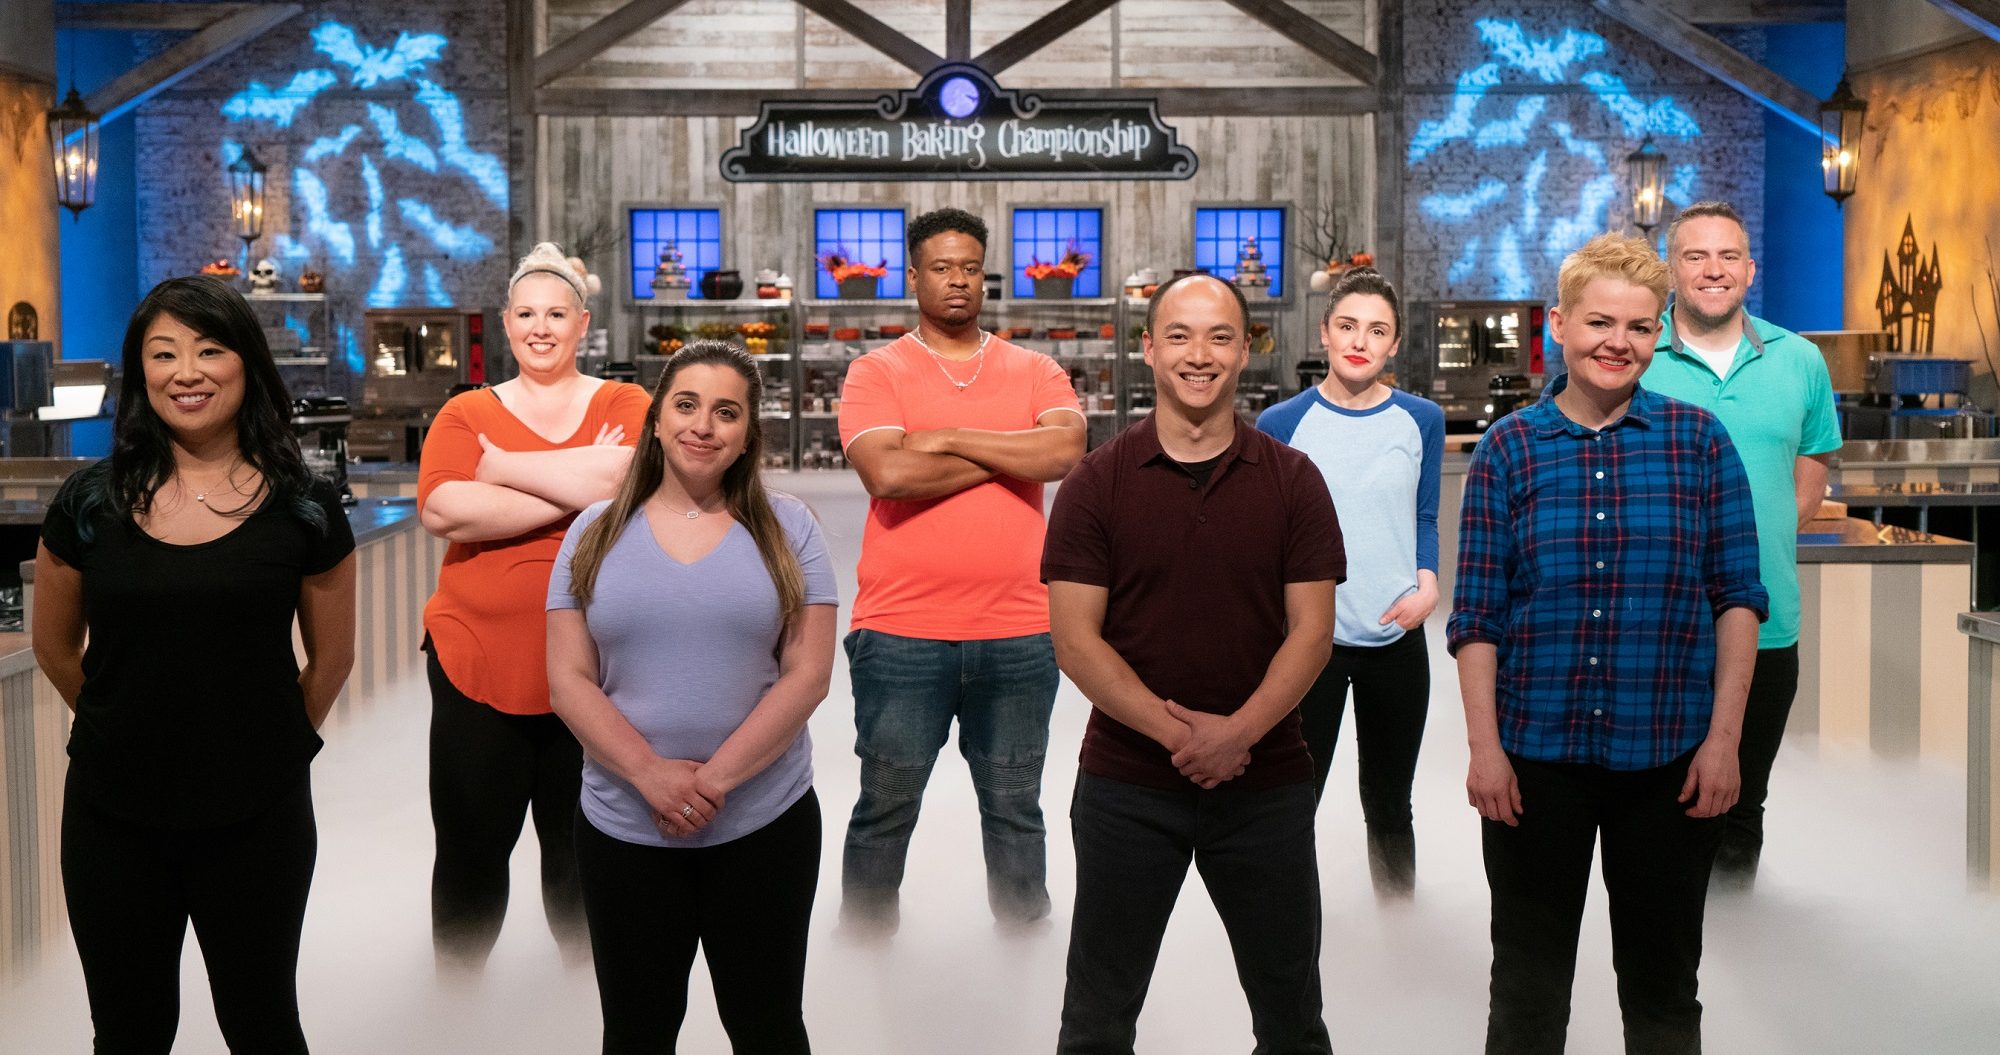 Food Network's 'Halloween Baking Championship' Returns With Terrifying